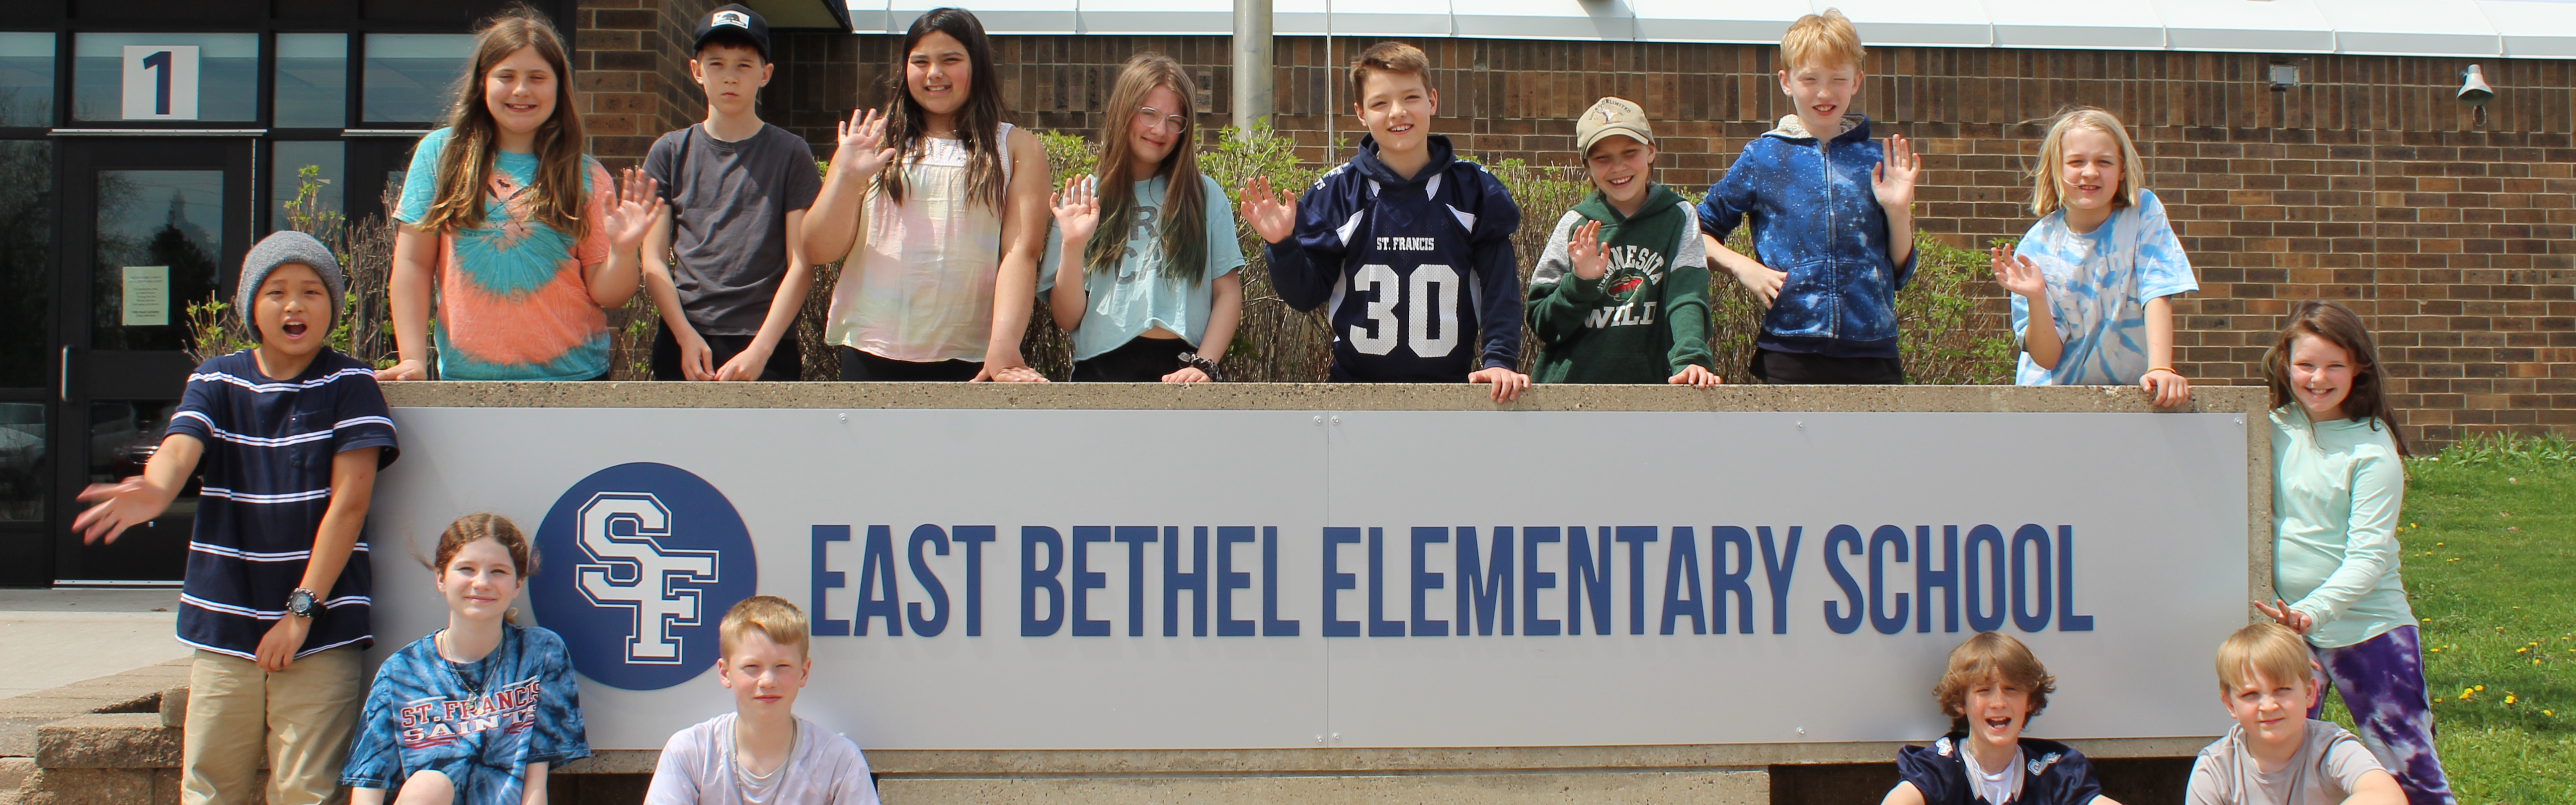 Image: Students waving and standing around the East Bethel Elementary School Sign